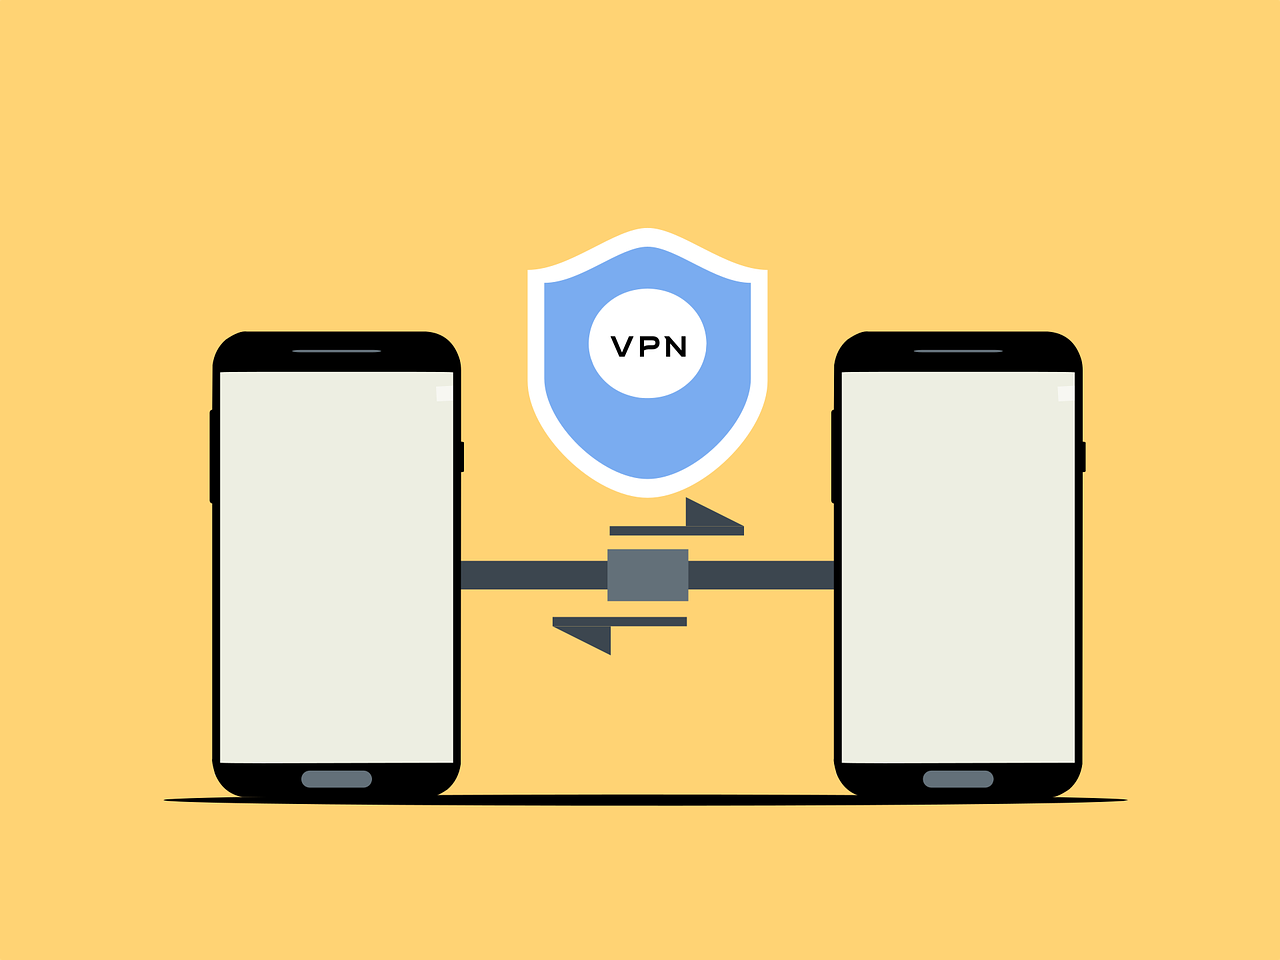 Understanding what a VPN is and how it works